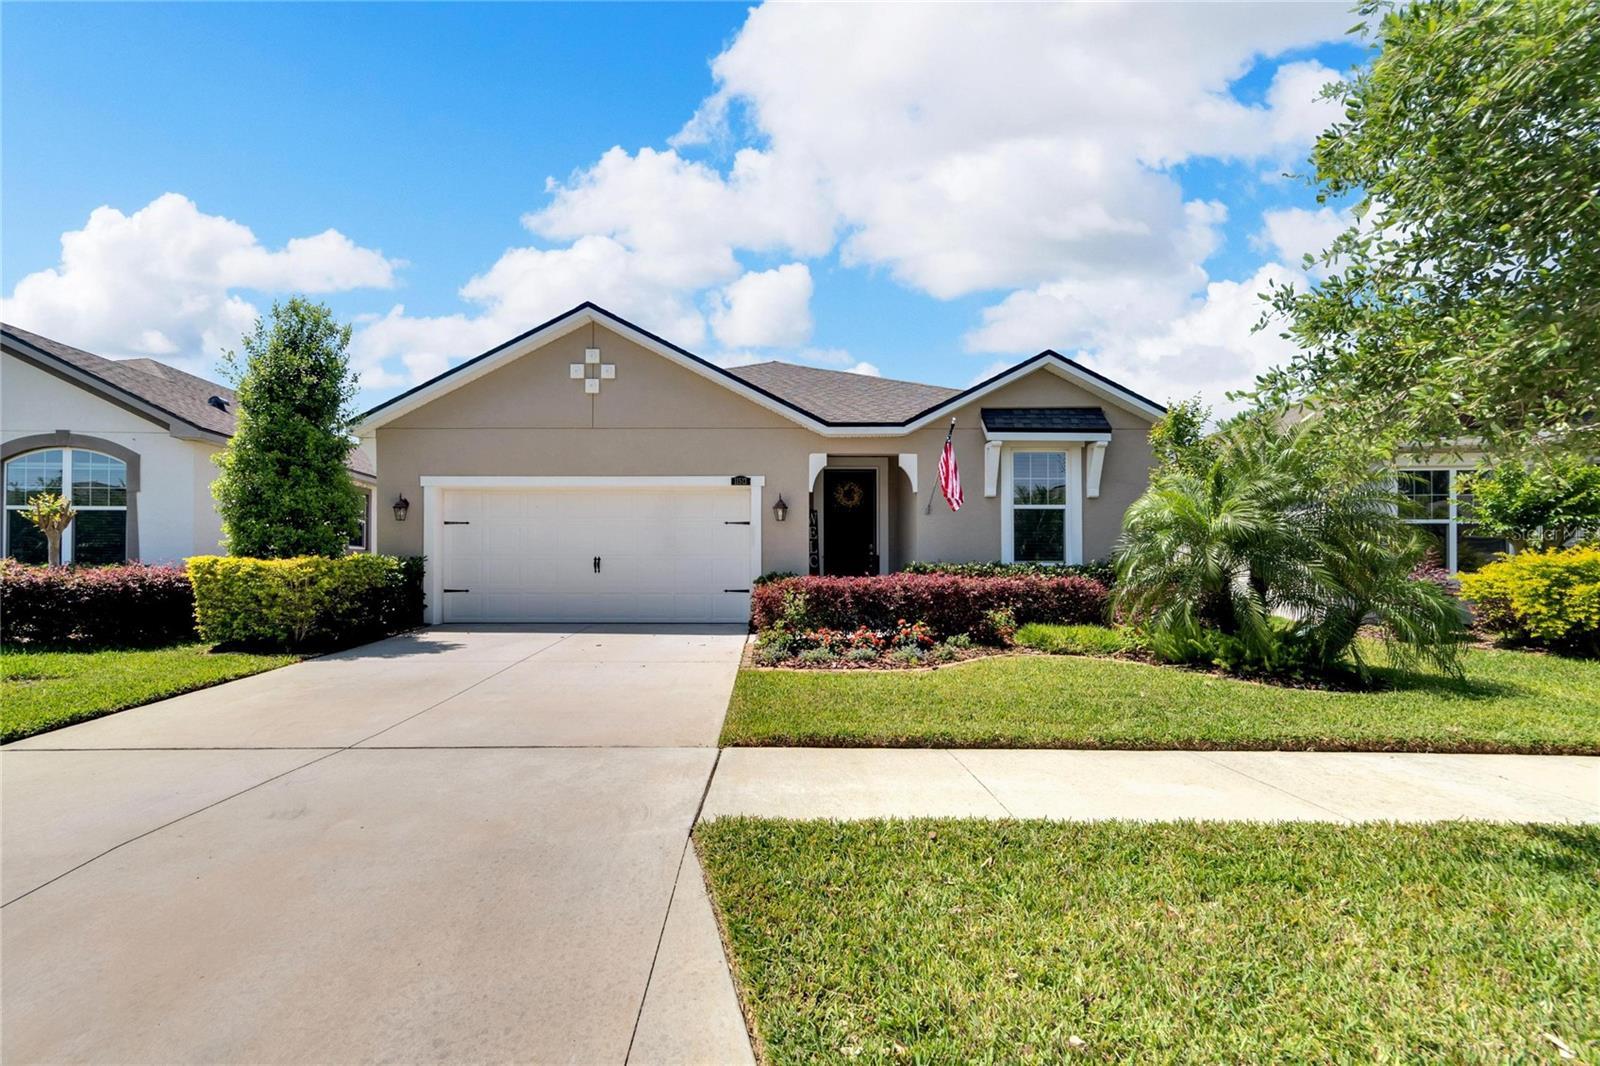 Photo one of 11513 Blue Woods Dr Riverview FL 33569 | MLS T3518268